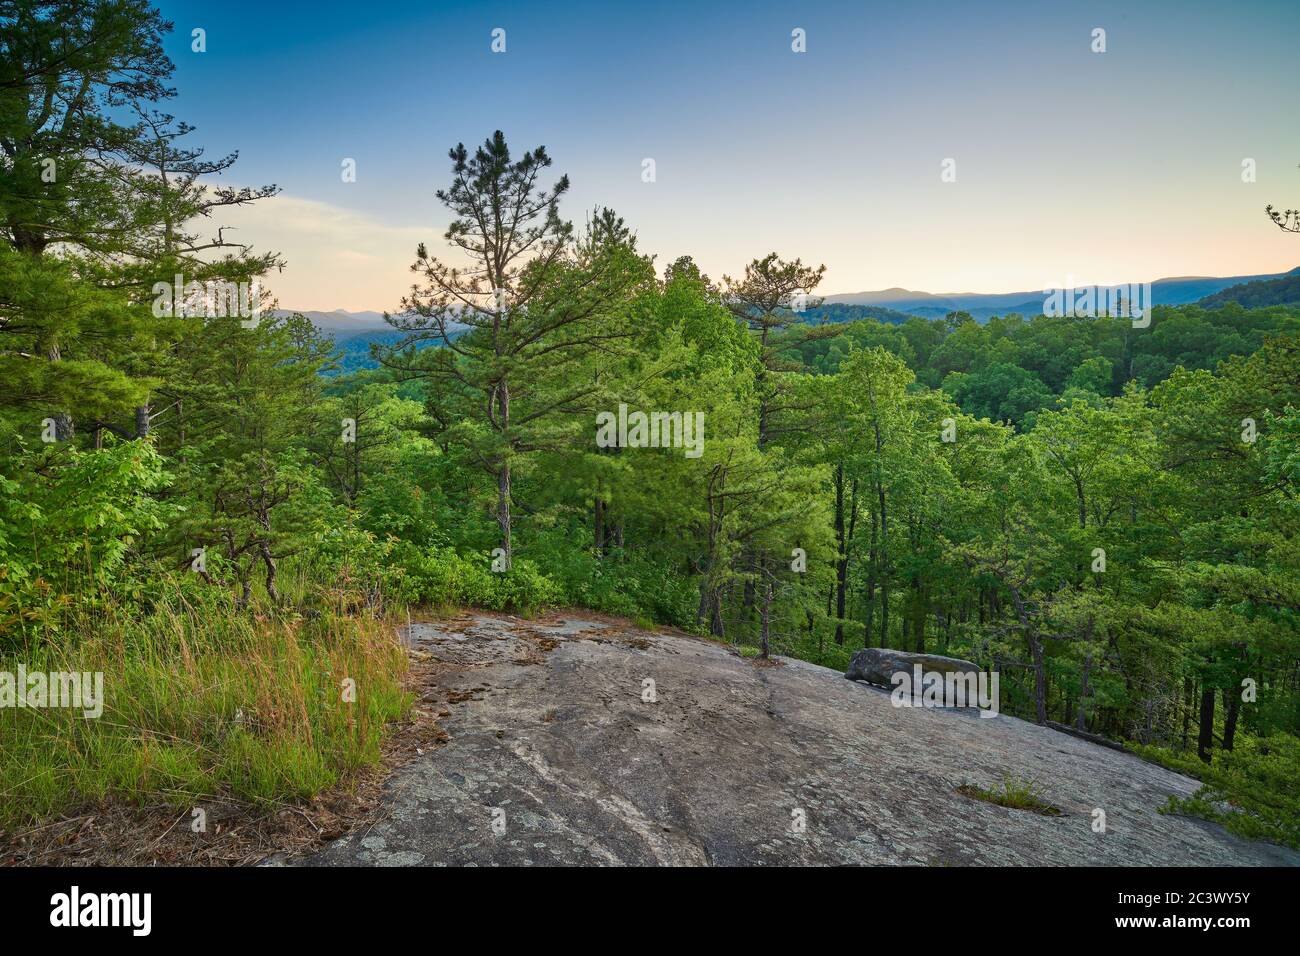 Exposed rock face with pine trees at sunset. Stock Photo